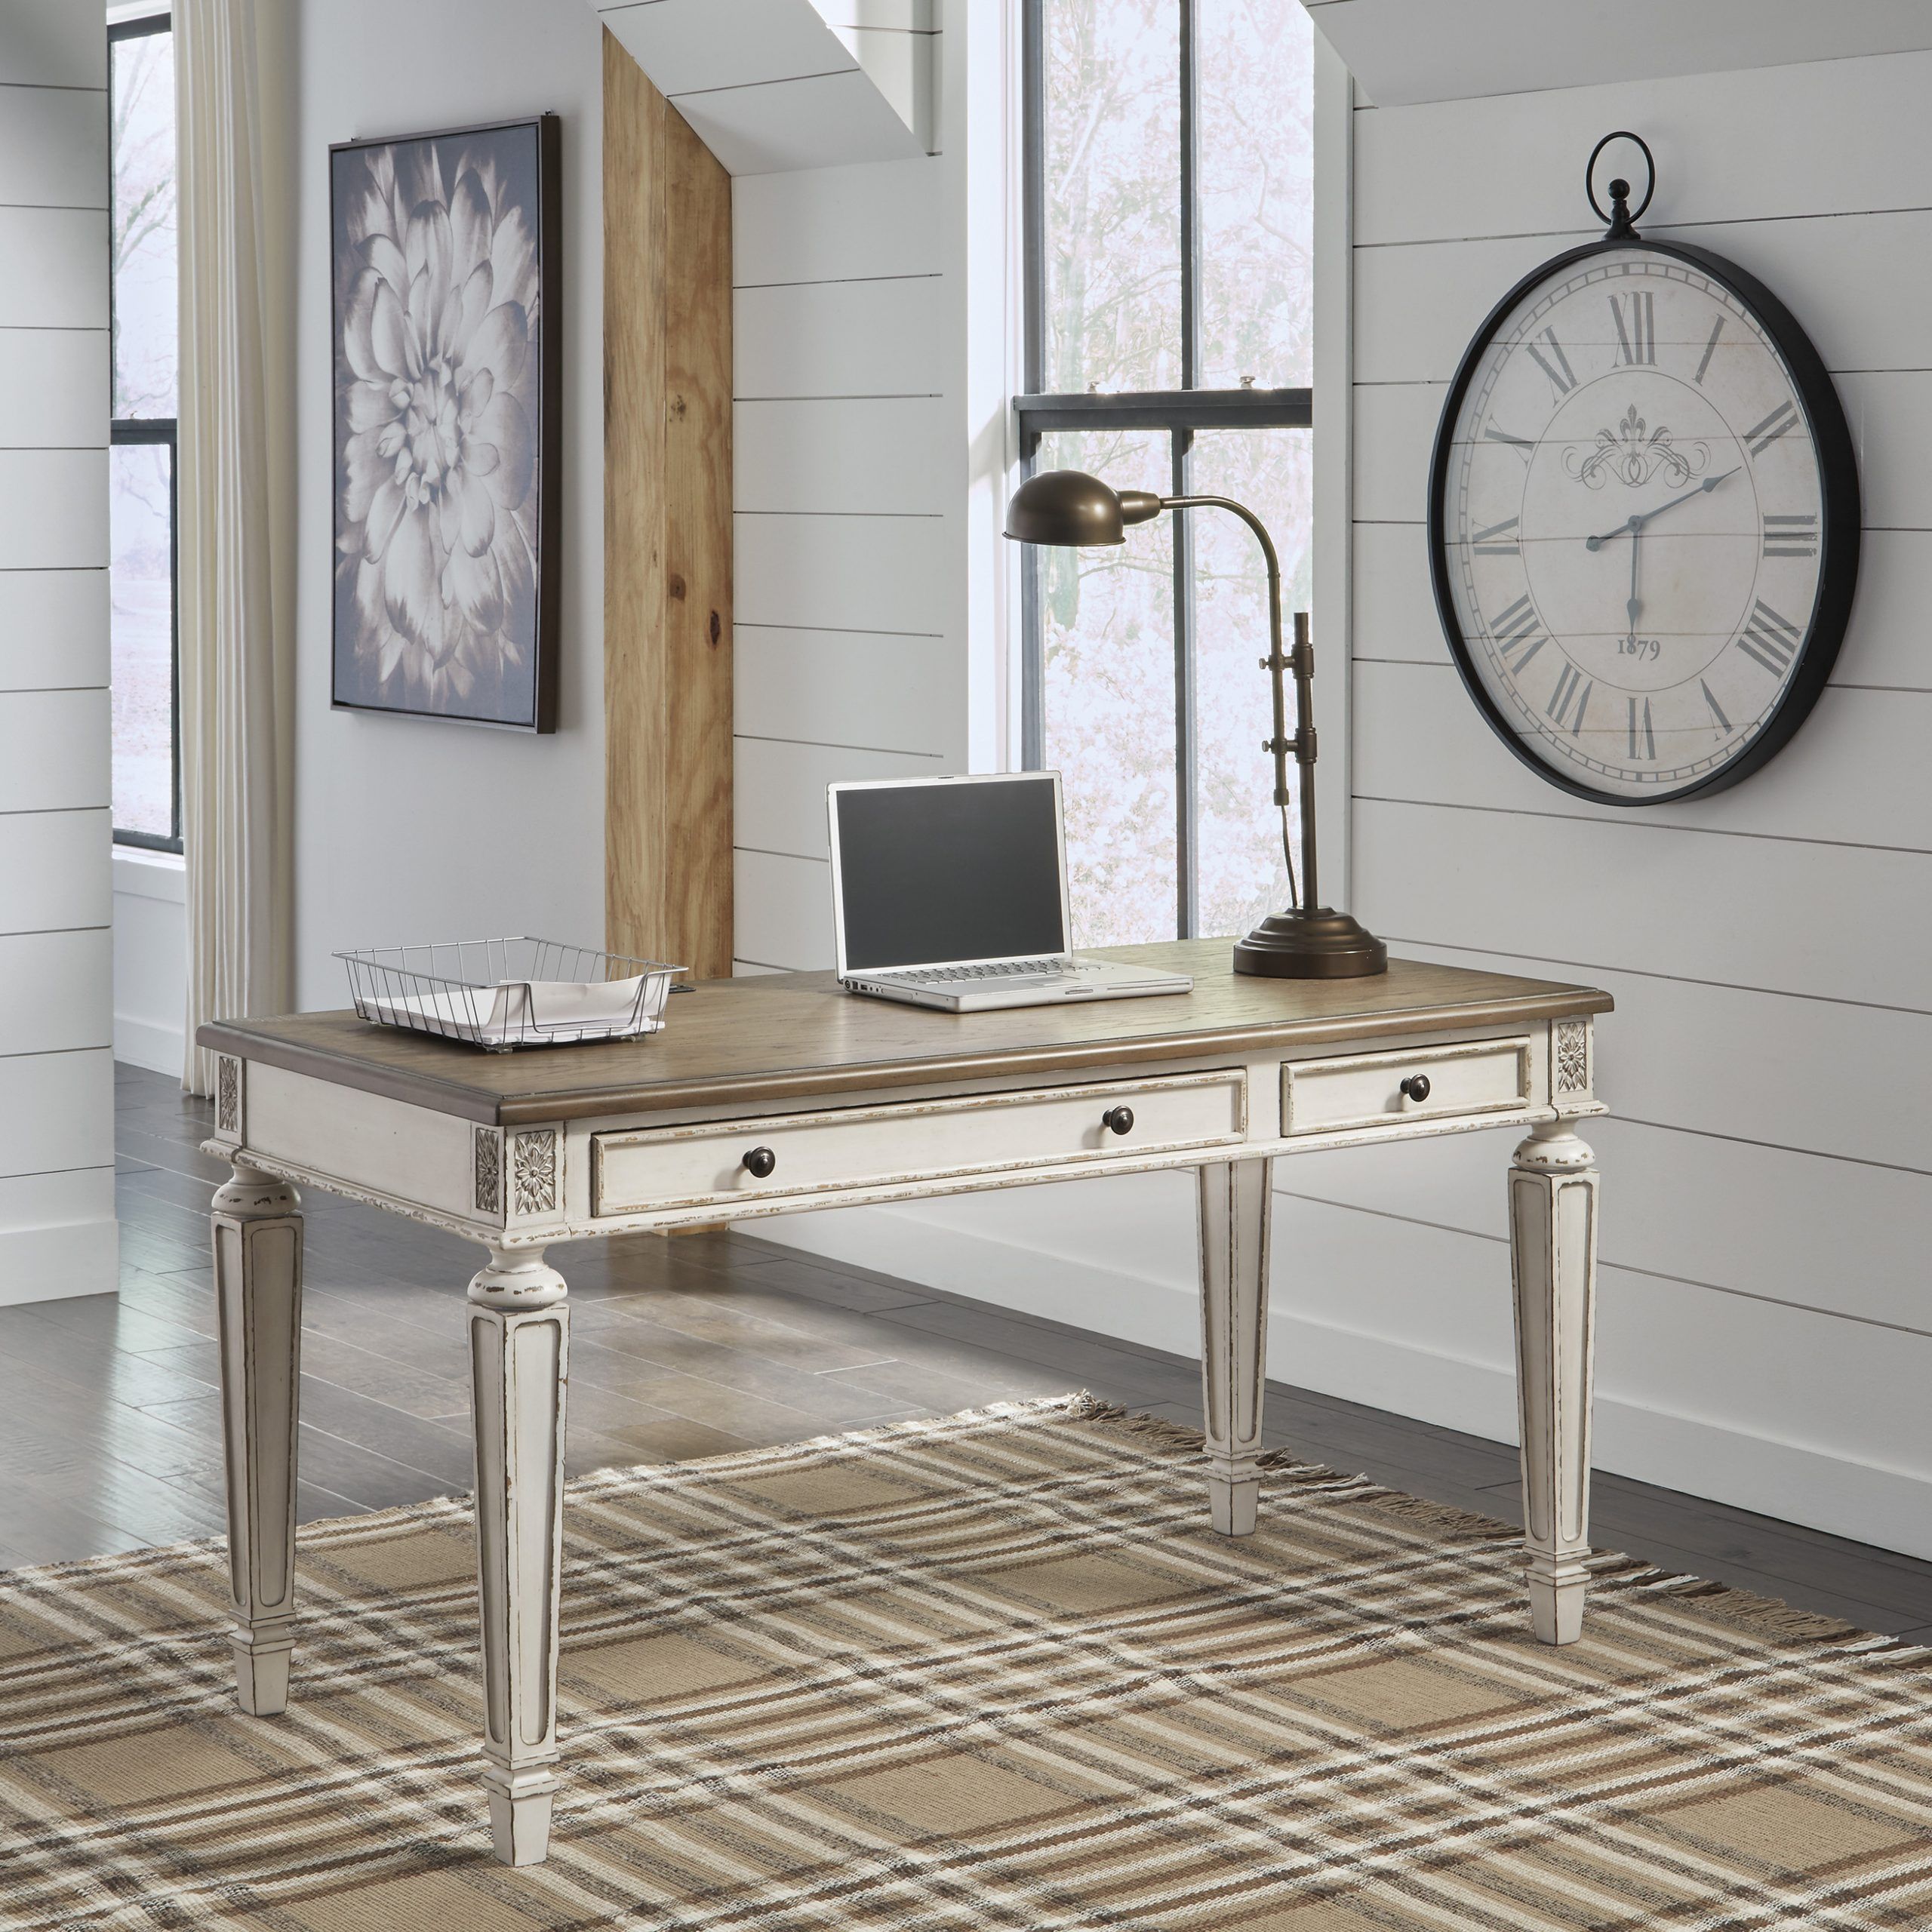 Realyn Antique White Home Office Desk | Sandhills Furniture With Hwhite Wood And Metal Office Desks (View 12 of 15)